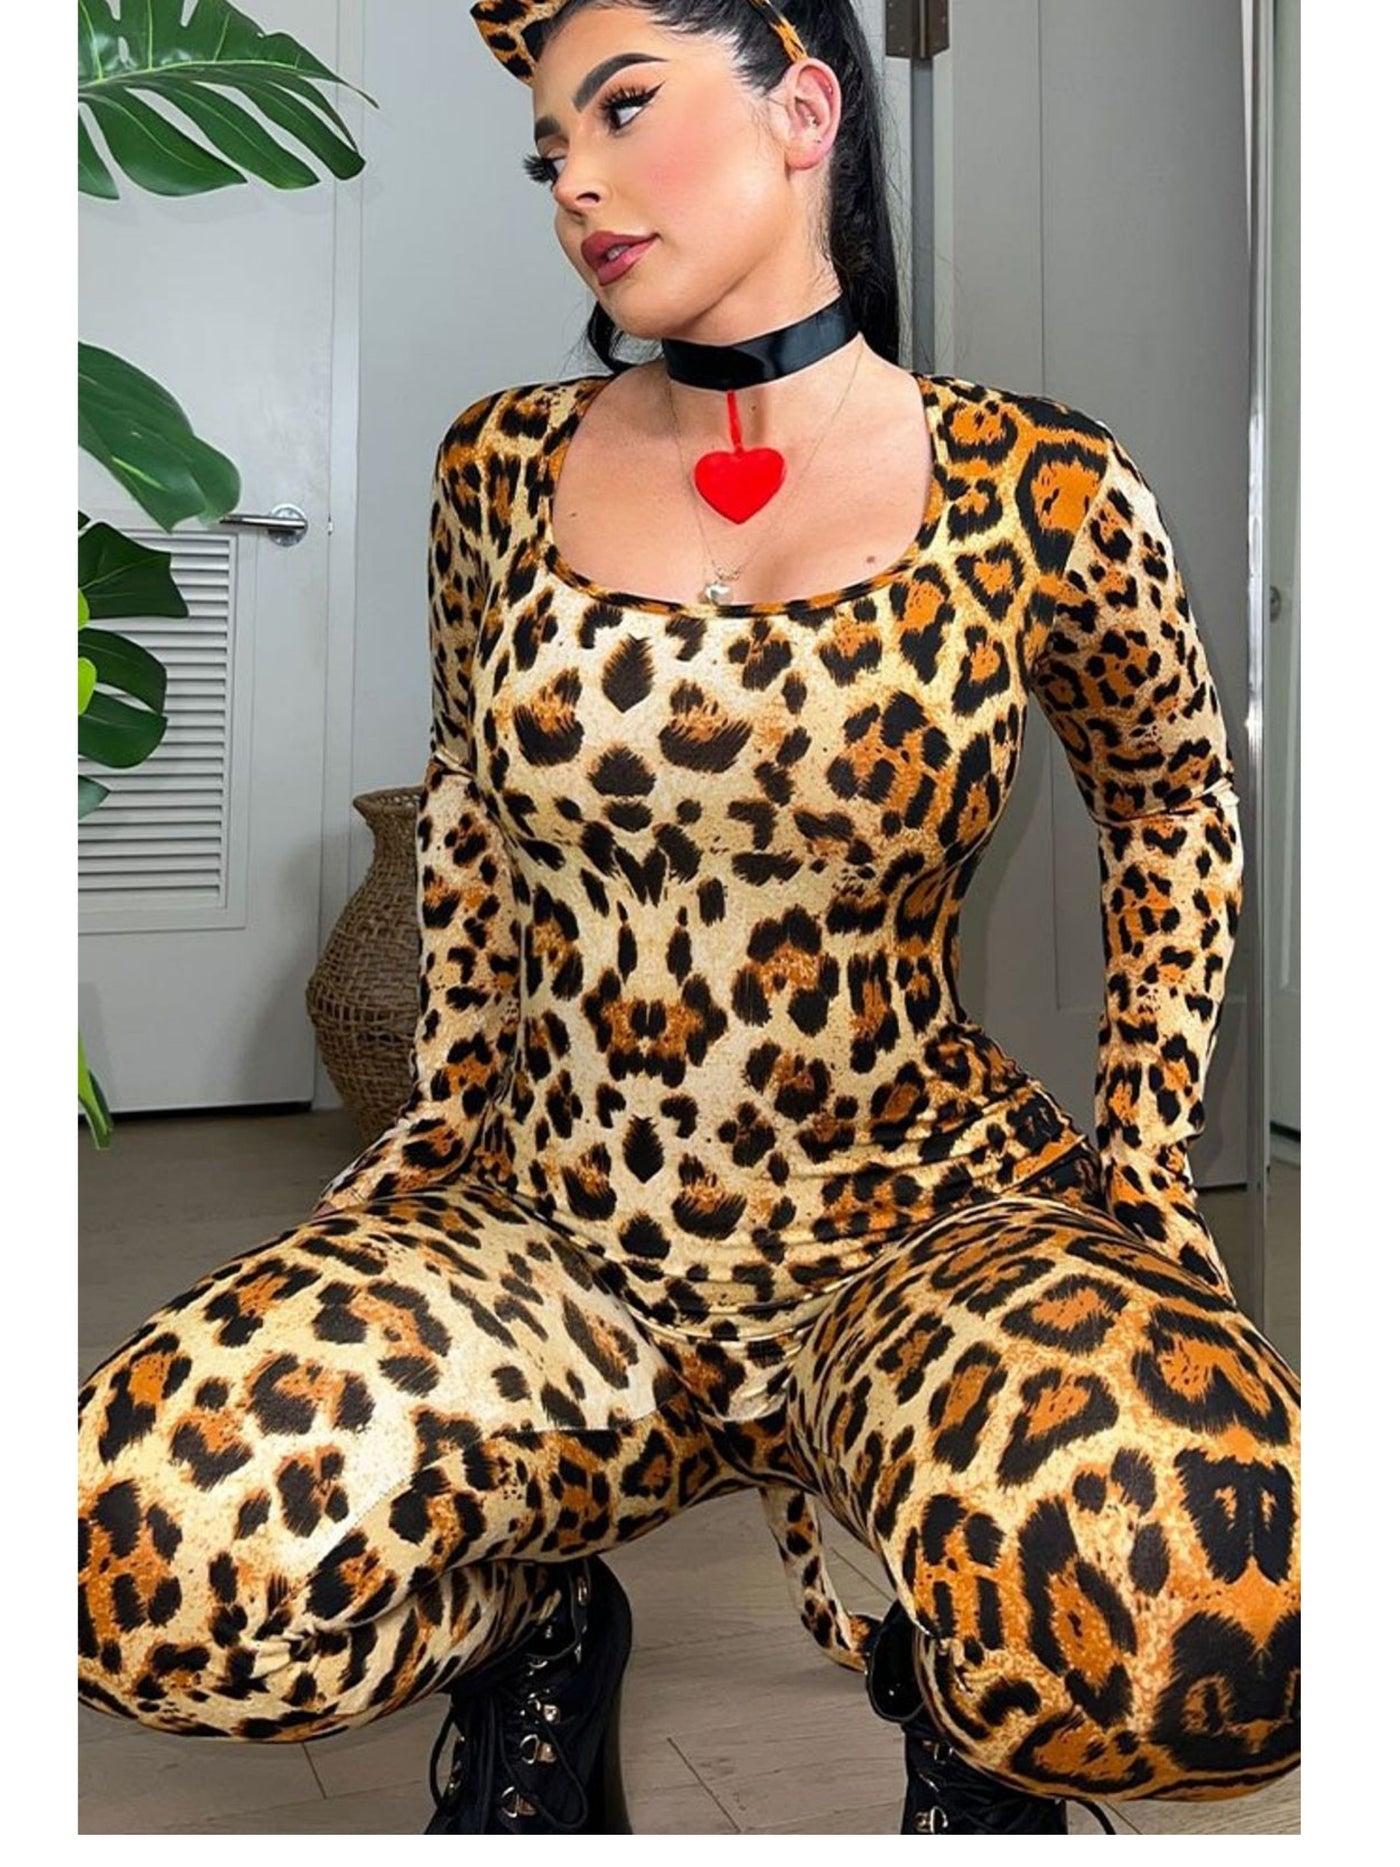 Womens Sexy Leopard Print Catsuit Costume - Shop Fortune Costumes Lingerie